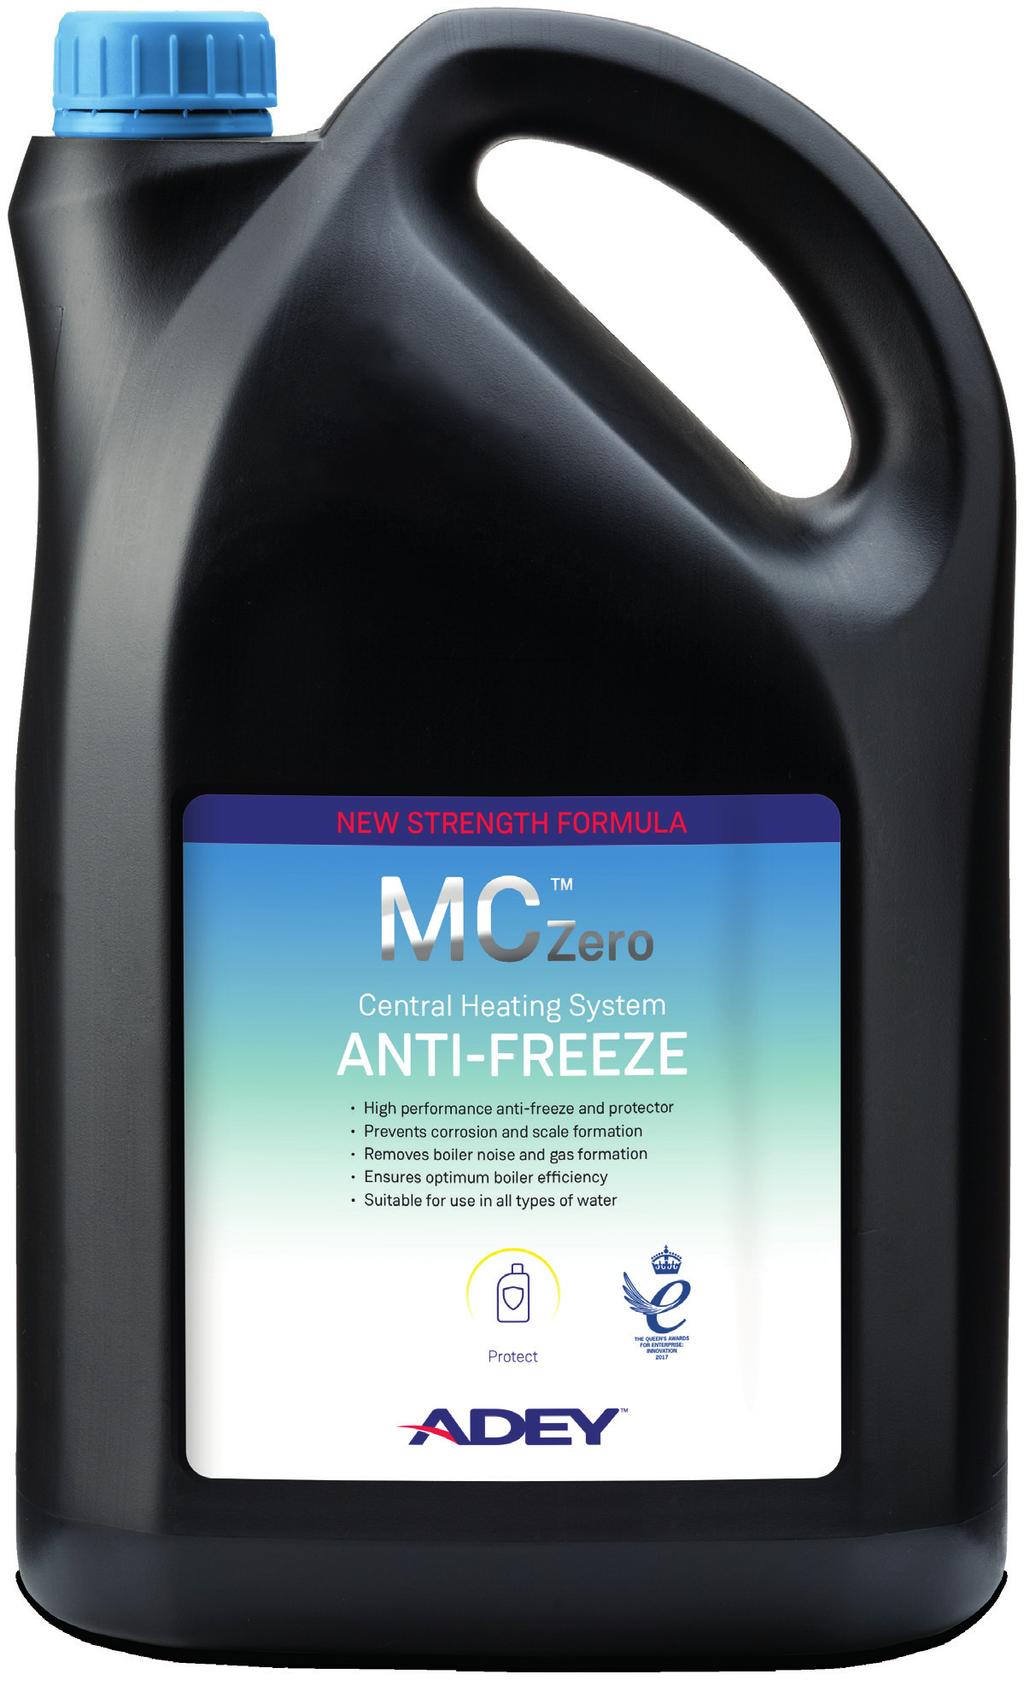 Central Heating System ANTI-FREEZE MCZero is a mono propylene based anti freeze solution designed to prevent freezing in all types of water. Also prevents metal corrosion and scale formation.